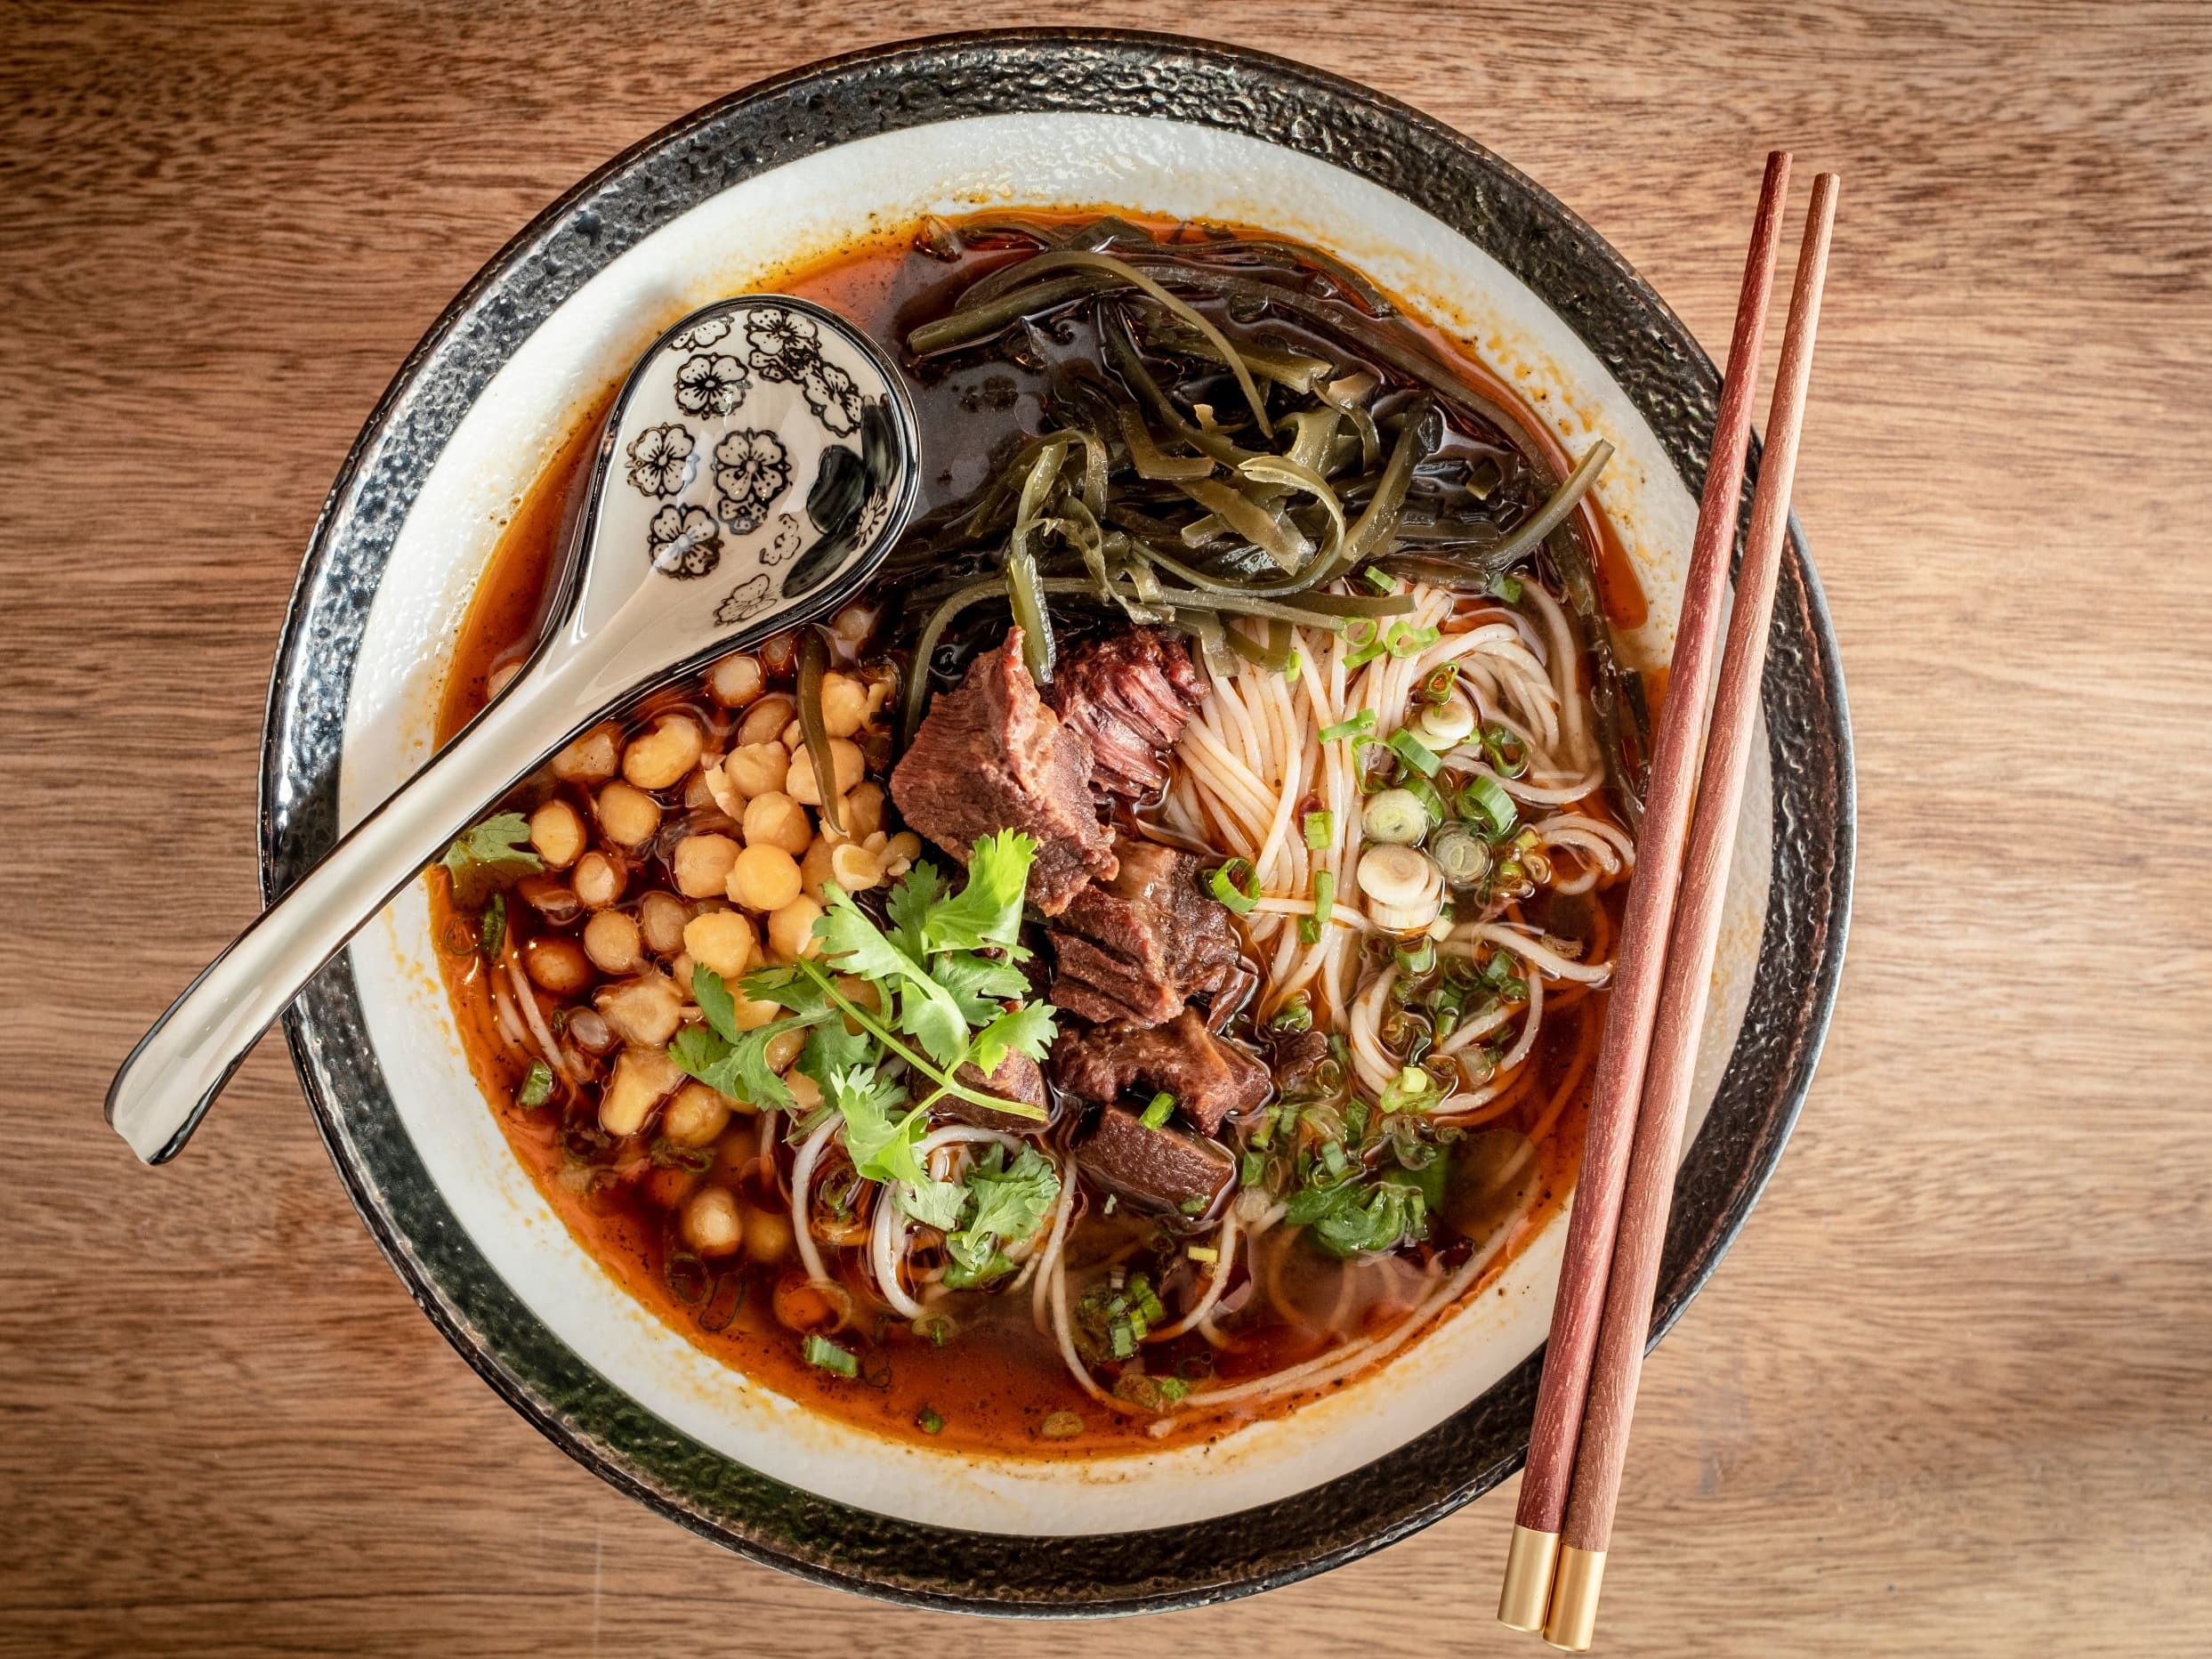 15% Discount on Dinner at Sichuan Alley - Get Deals, Cashback and Rewards with ShopBack GO